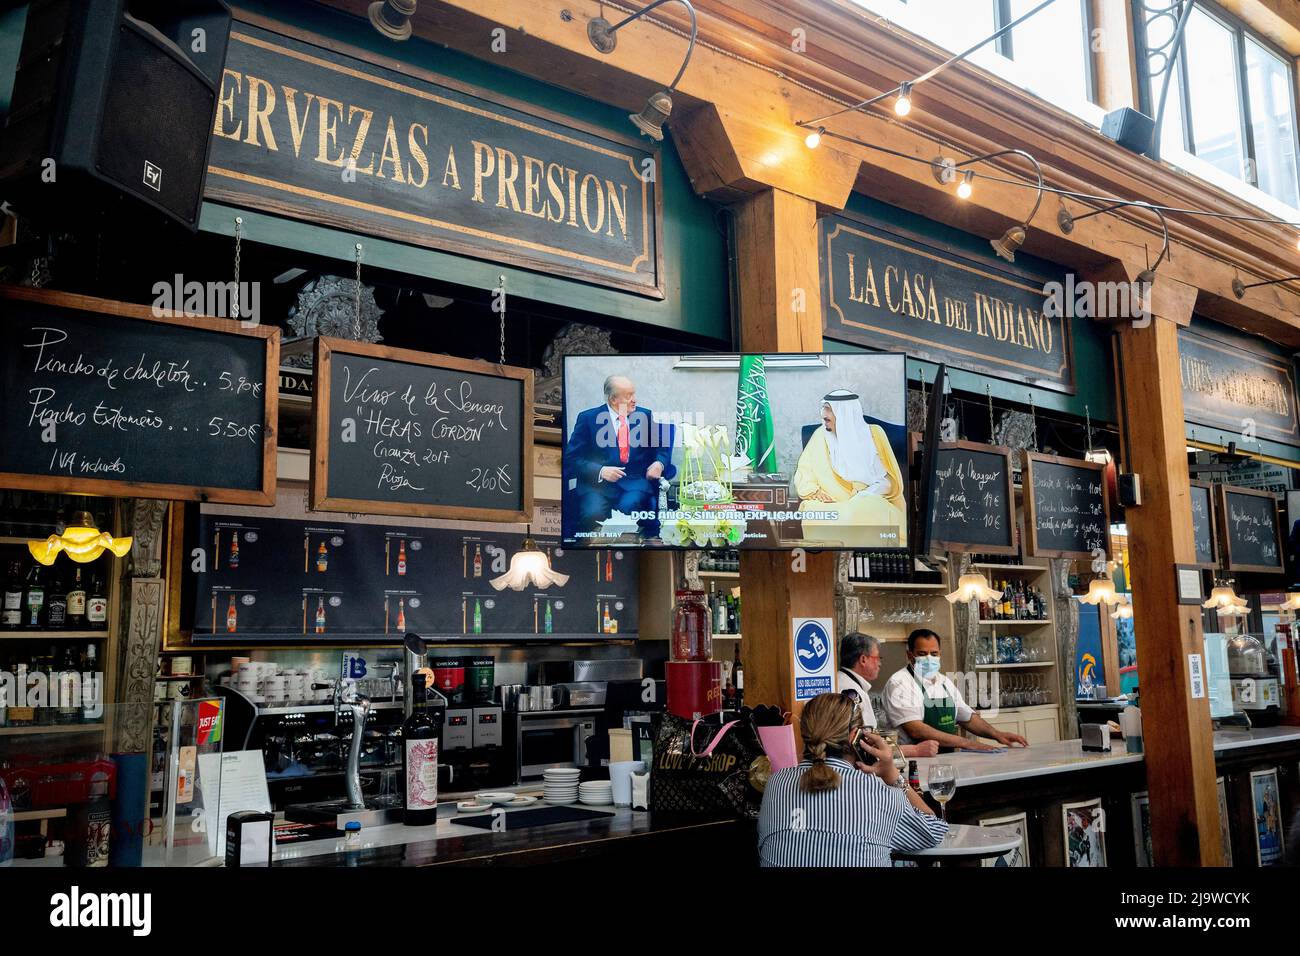 As pictures of Spain's former king Juan Carlos in exile in Abu Dhabi are broascast on national TV, customers enjoy afternoon drinks at La Casa del Indiano, a bar and restaurant in the covered Mercado del Este, on 19th May 2022, in Santander, Cantabria, Spain. King Juan Carlos Felipe VI has been in exile in the Gulf state after being accused of money-laundering but the case was closed due to lack of evidence. Mercado del Este was designed by architect Antonio Zabaleta. Construction was between 1839 and 1842 and is considered to be one of the first examples of market 'galleries' built in Spain. Stock Photo